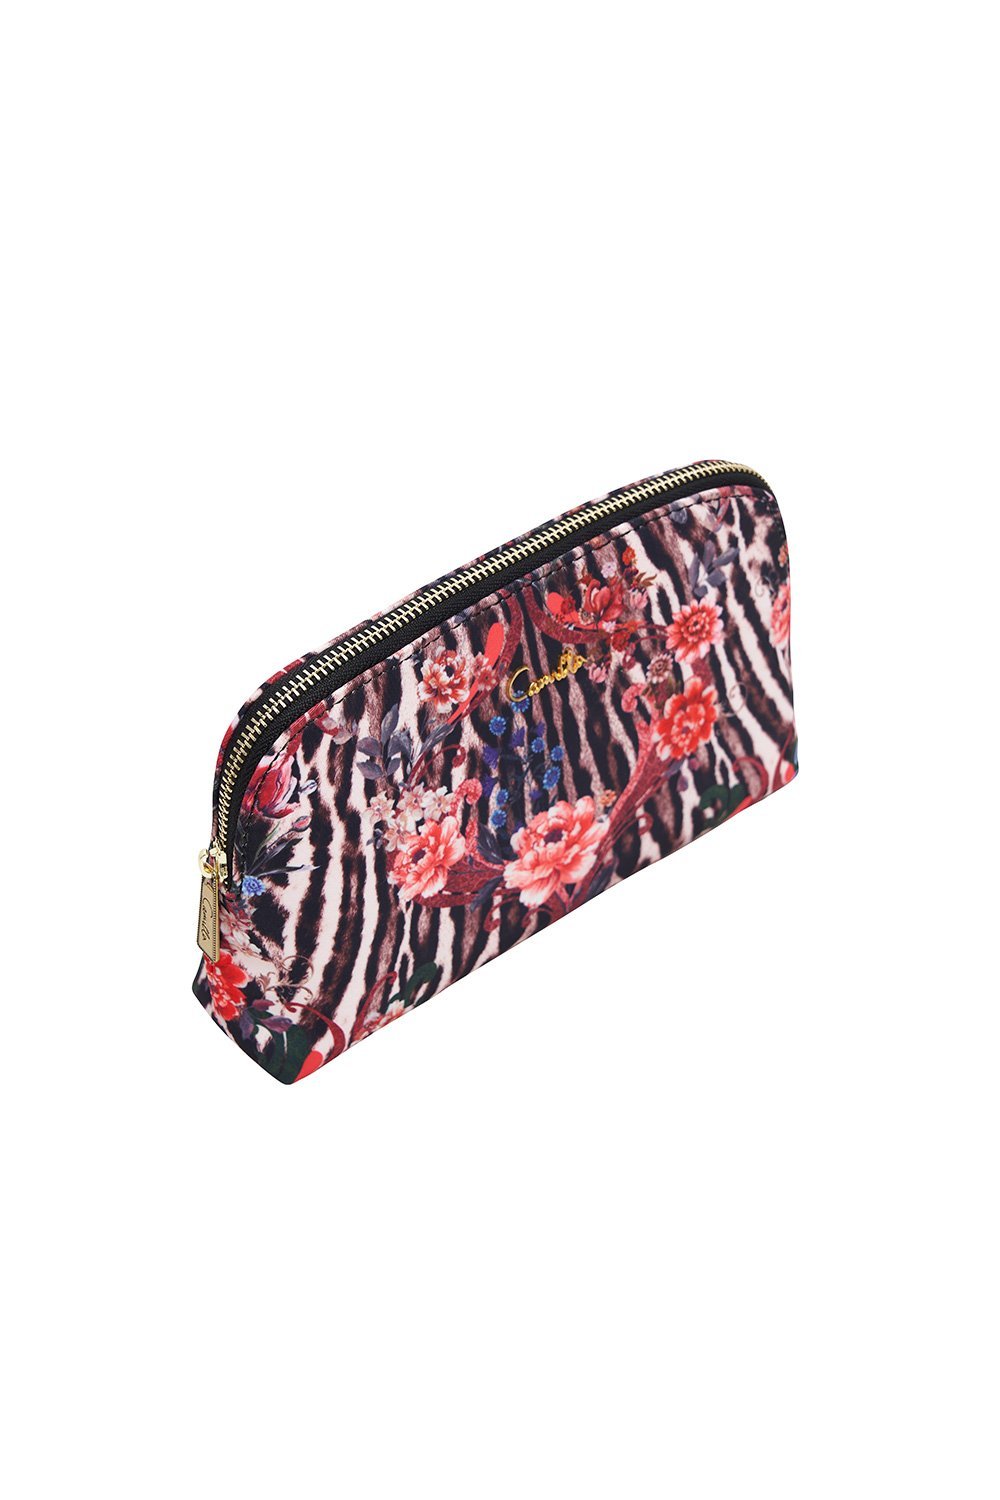 SMALL COSMETIC CASE LIV A LITTLE